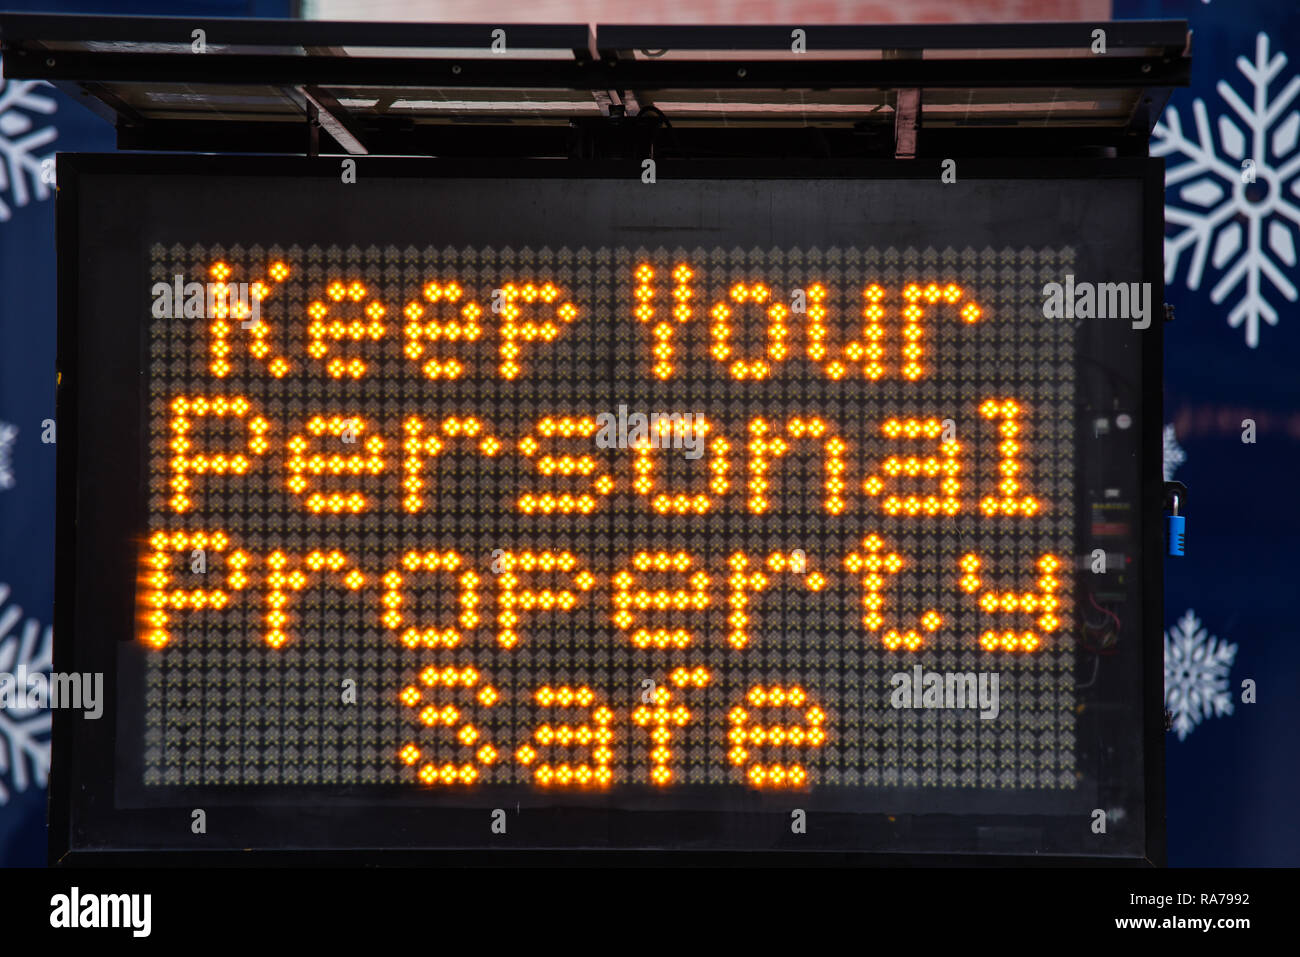 Keep your personal property safe matrix sign for New Year's Eve revelers in London, UK. Warning message Stock Photo